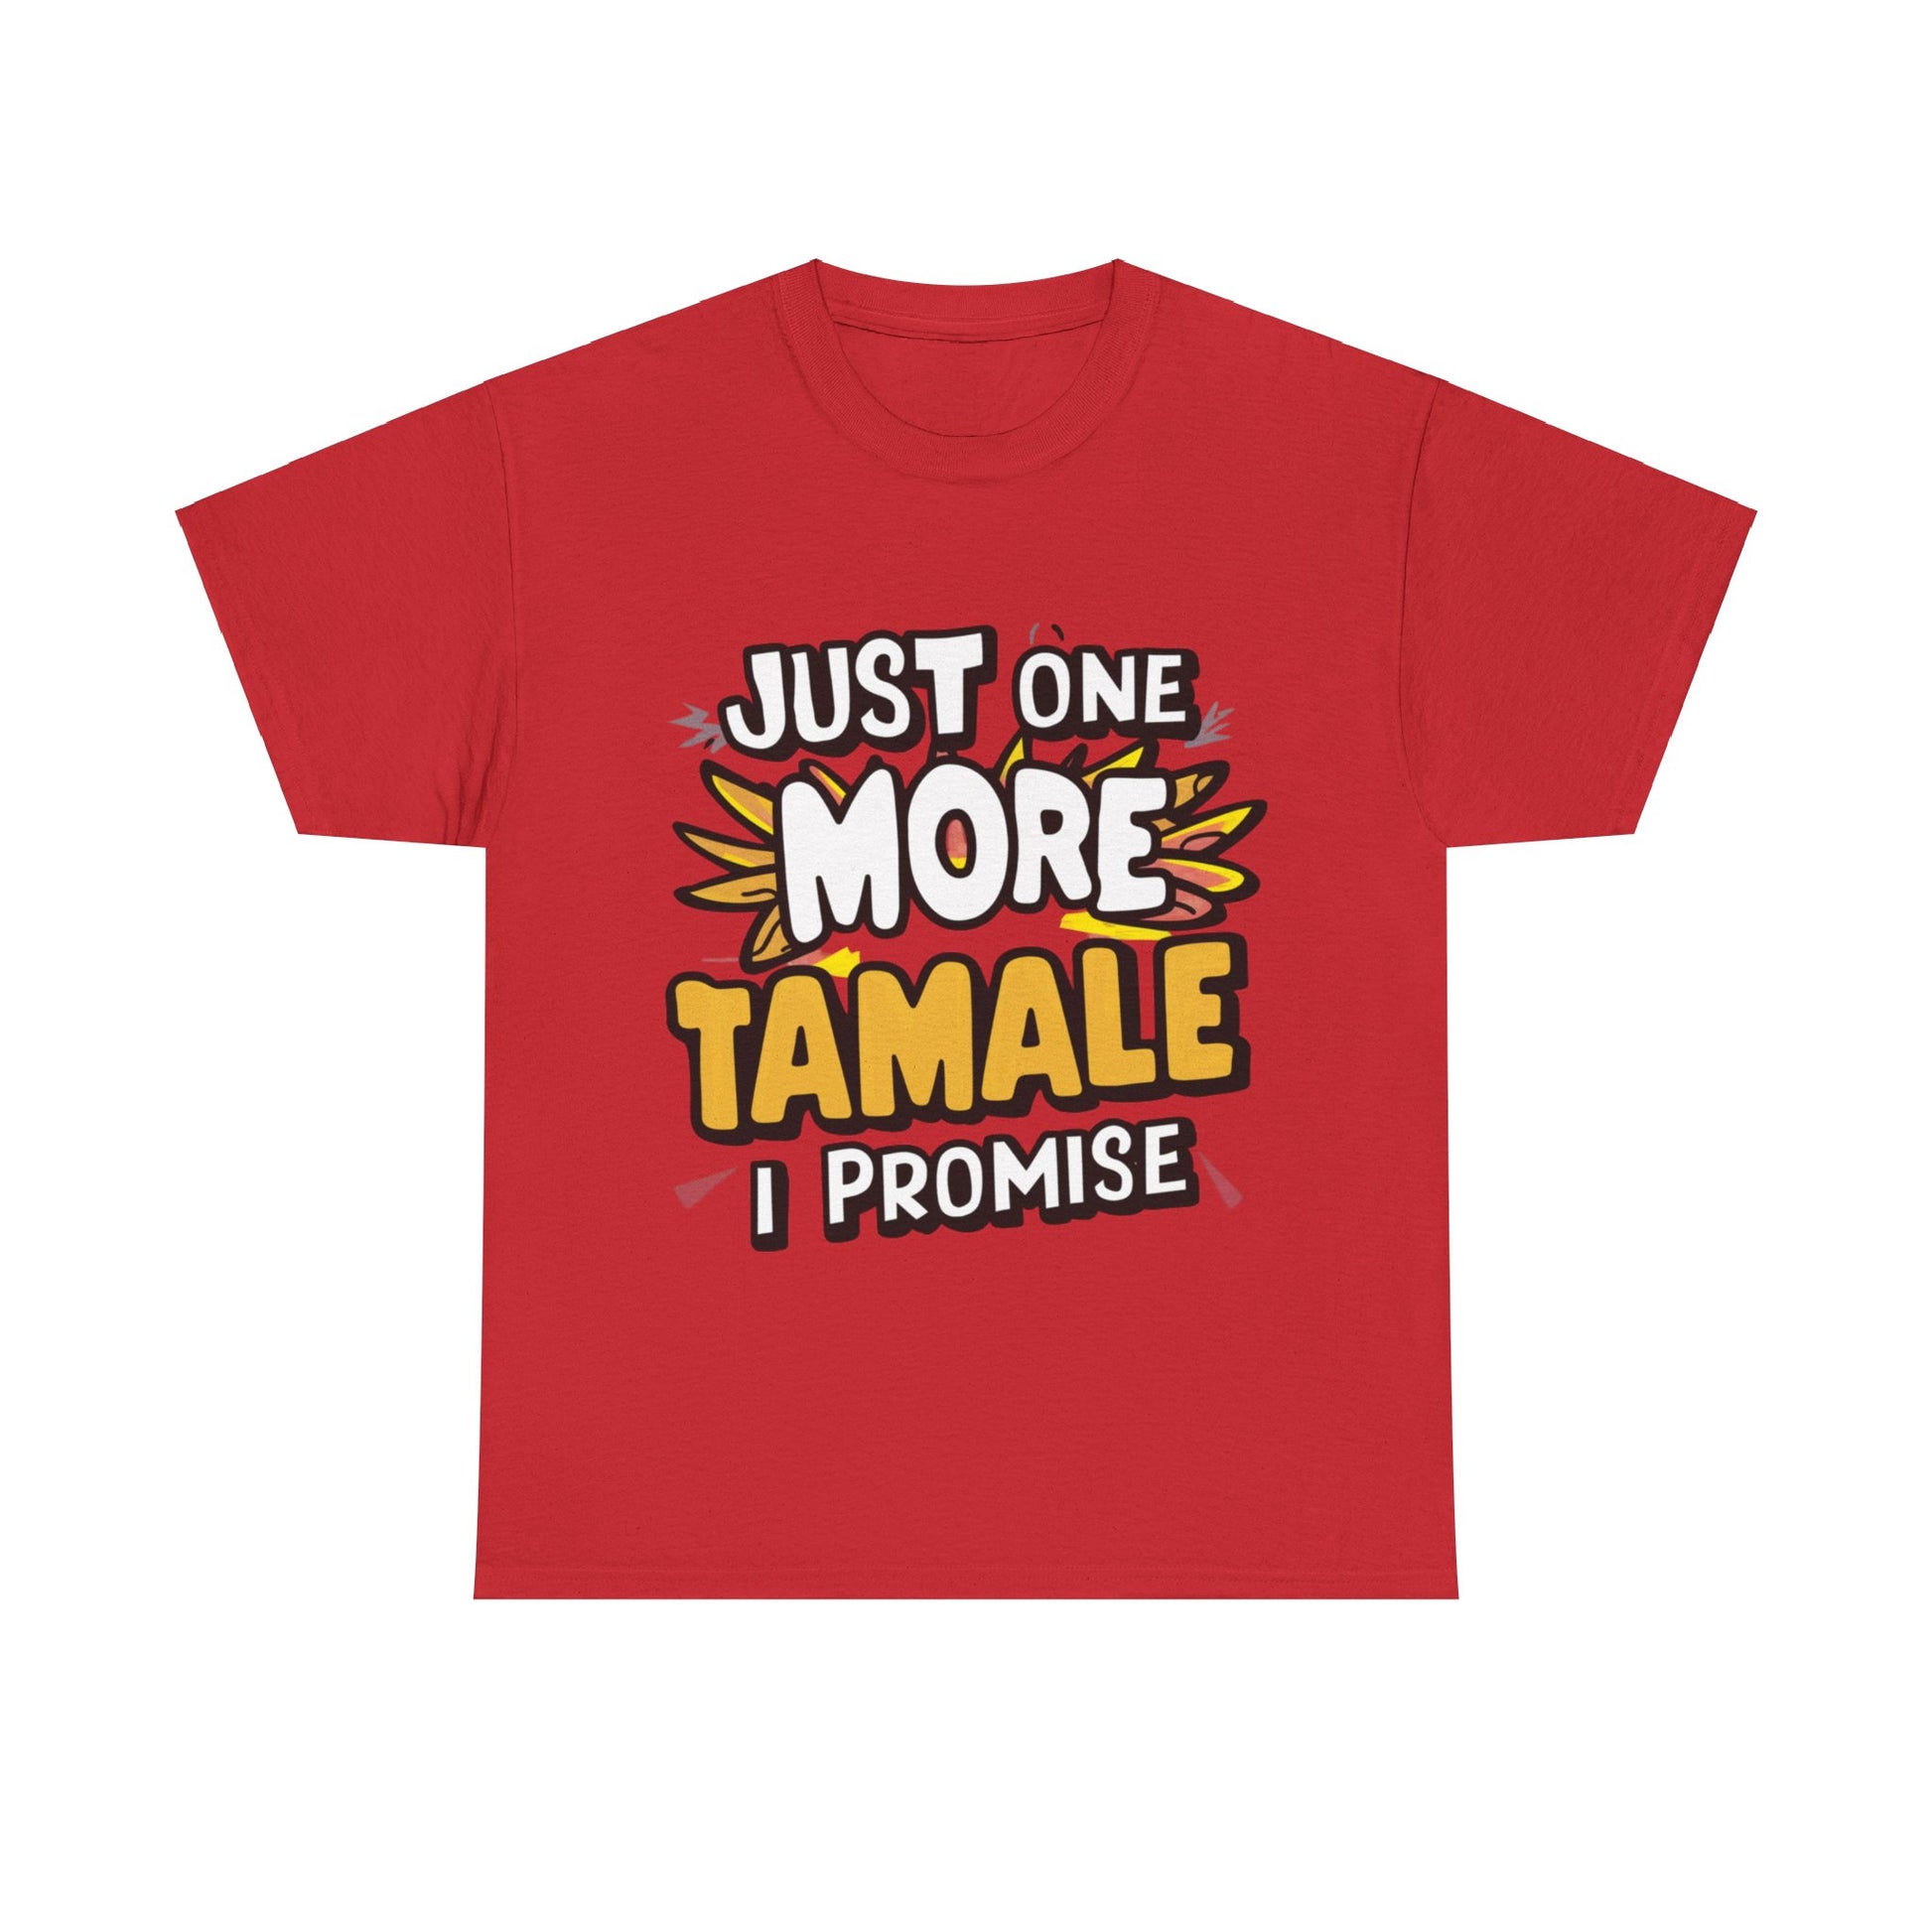 Just One More Tamale I Promise Mexican Food Graphic Unisex Heavy Cotton Tee Cotton Funny Humorous Graphic Soft Premium Unisex Men Women Red T-shirt Birthday Gift-7